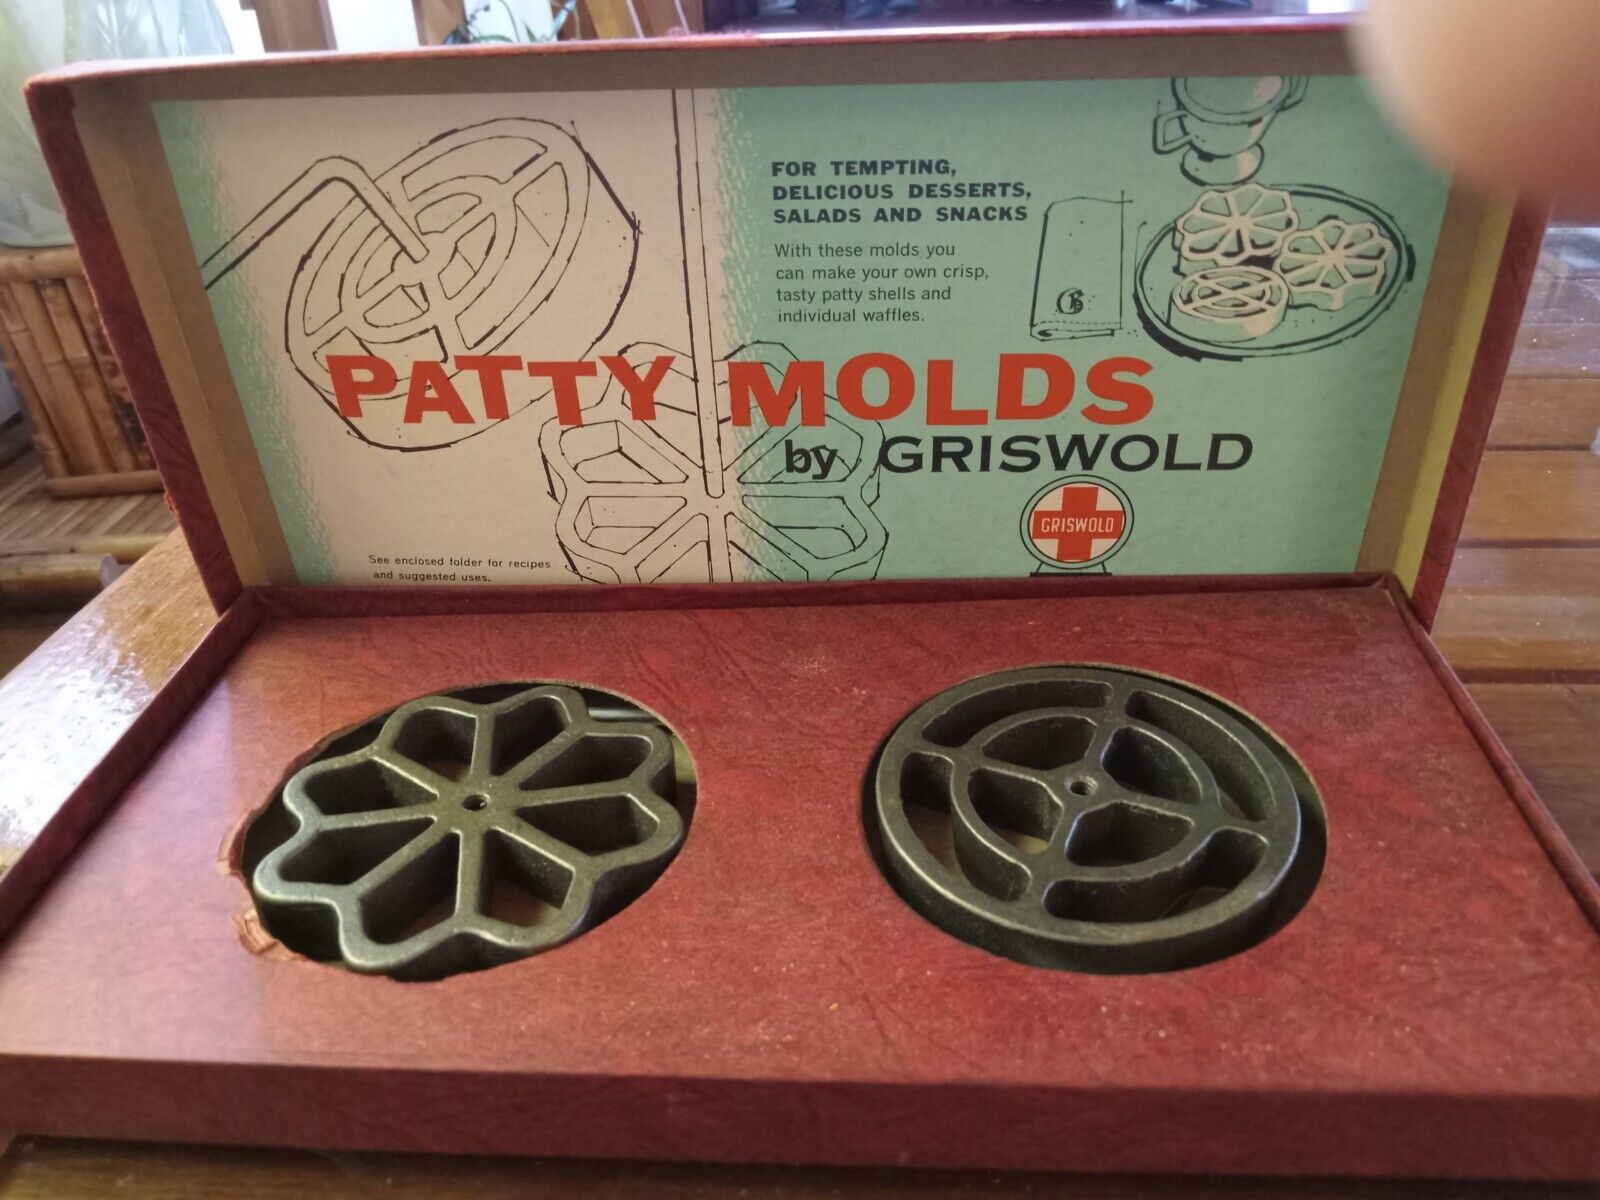 Vintage \'50s Griswold Patty molds, cool graphic original box. Griswold quality.